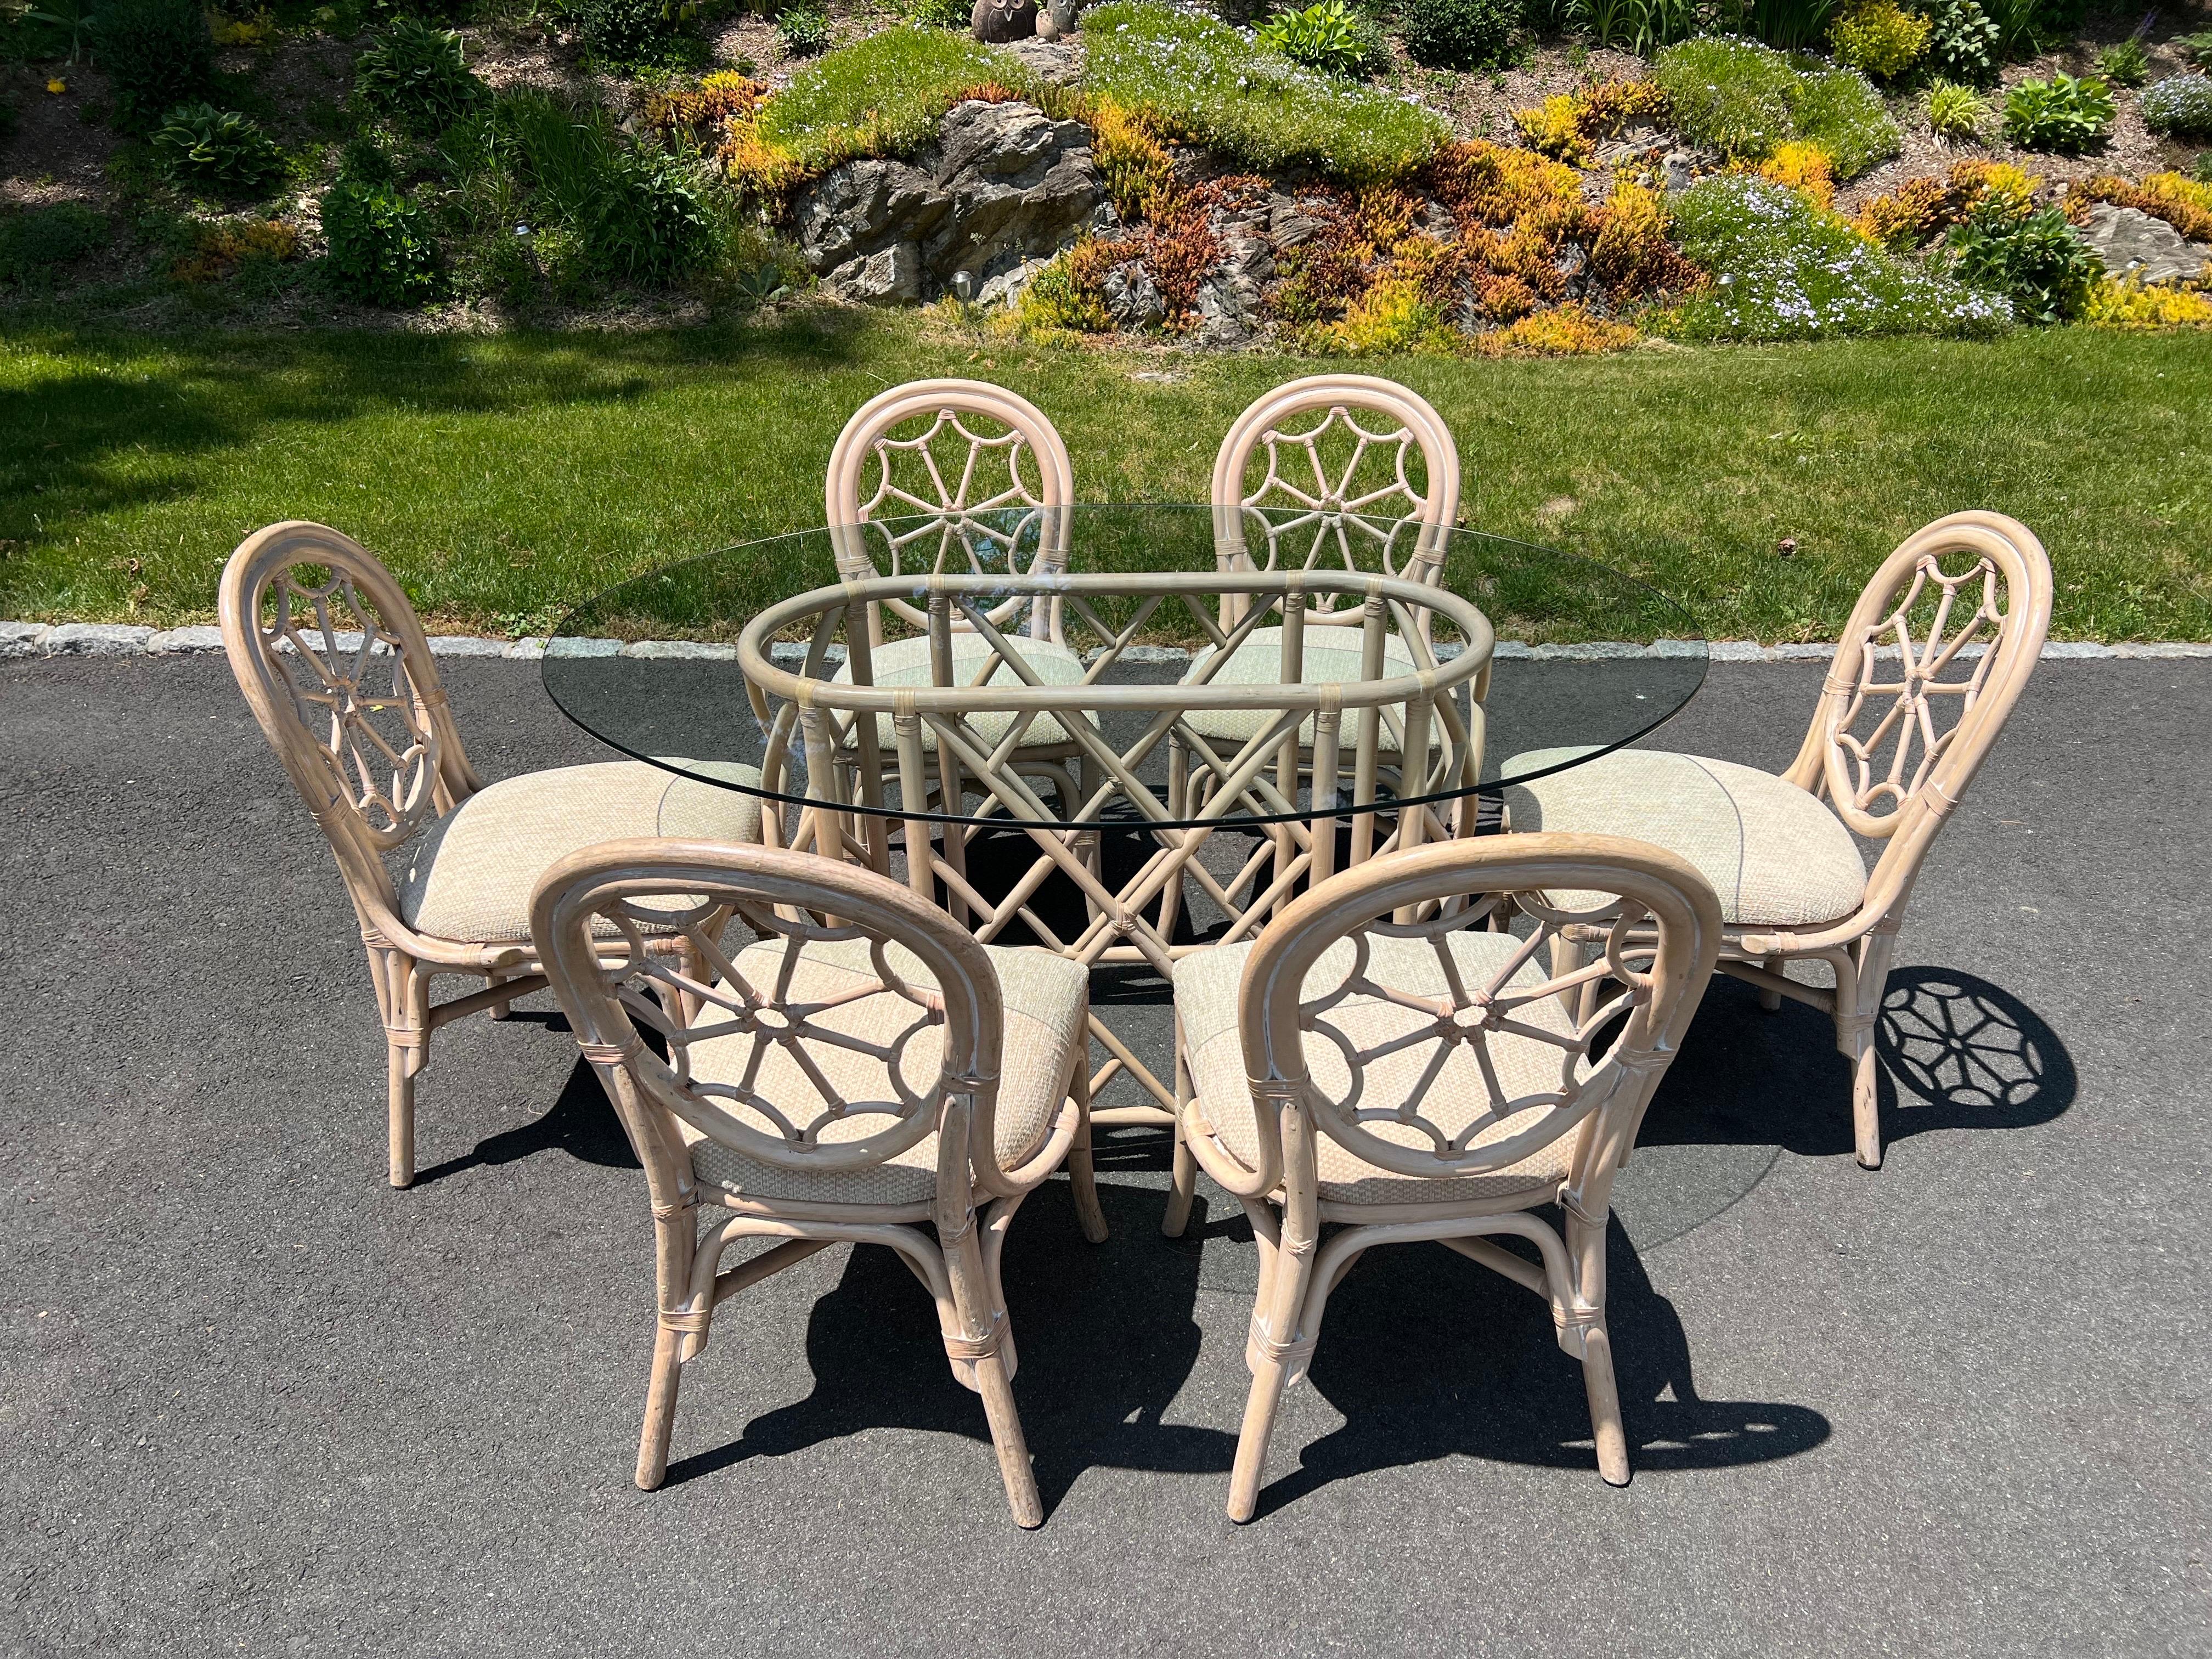 Mid Century Rattan Dining Set with Six Chairs. Amazing cobweb designed back to these sculptural chairs. Covered in a neutral oatmeal chenille. Large oval glass top sits above the intricate chinoiserie designed oval base. The existing glass top is a